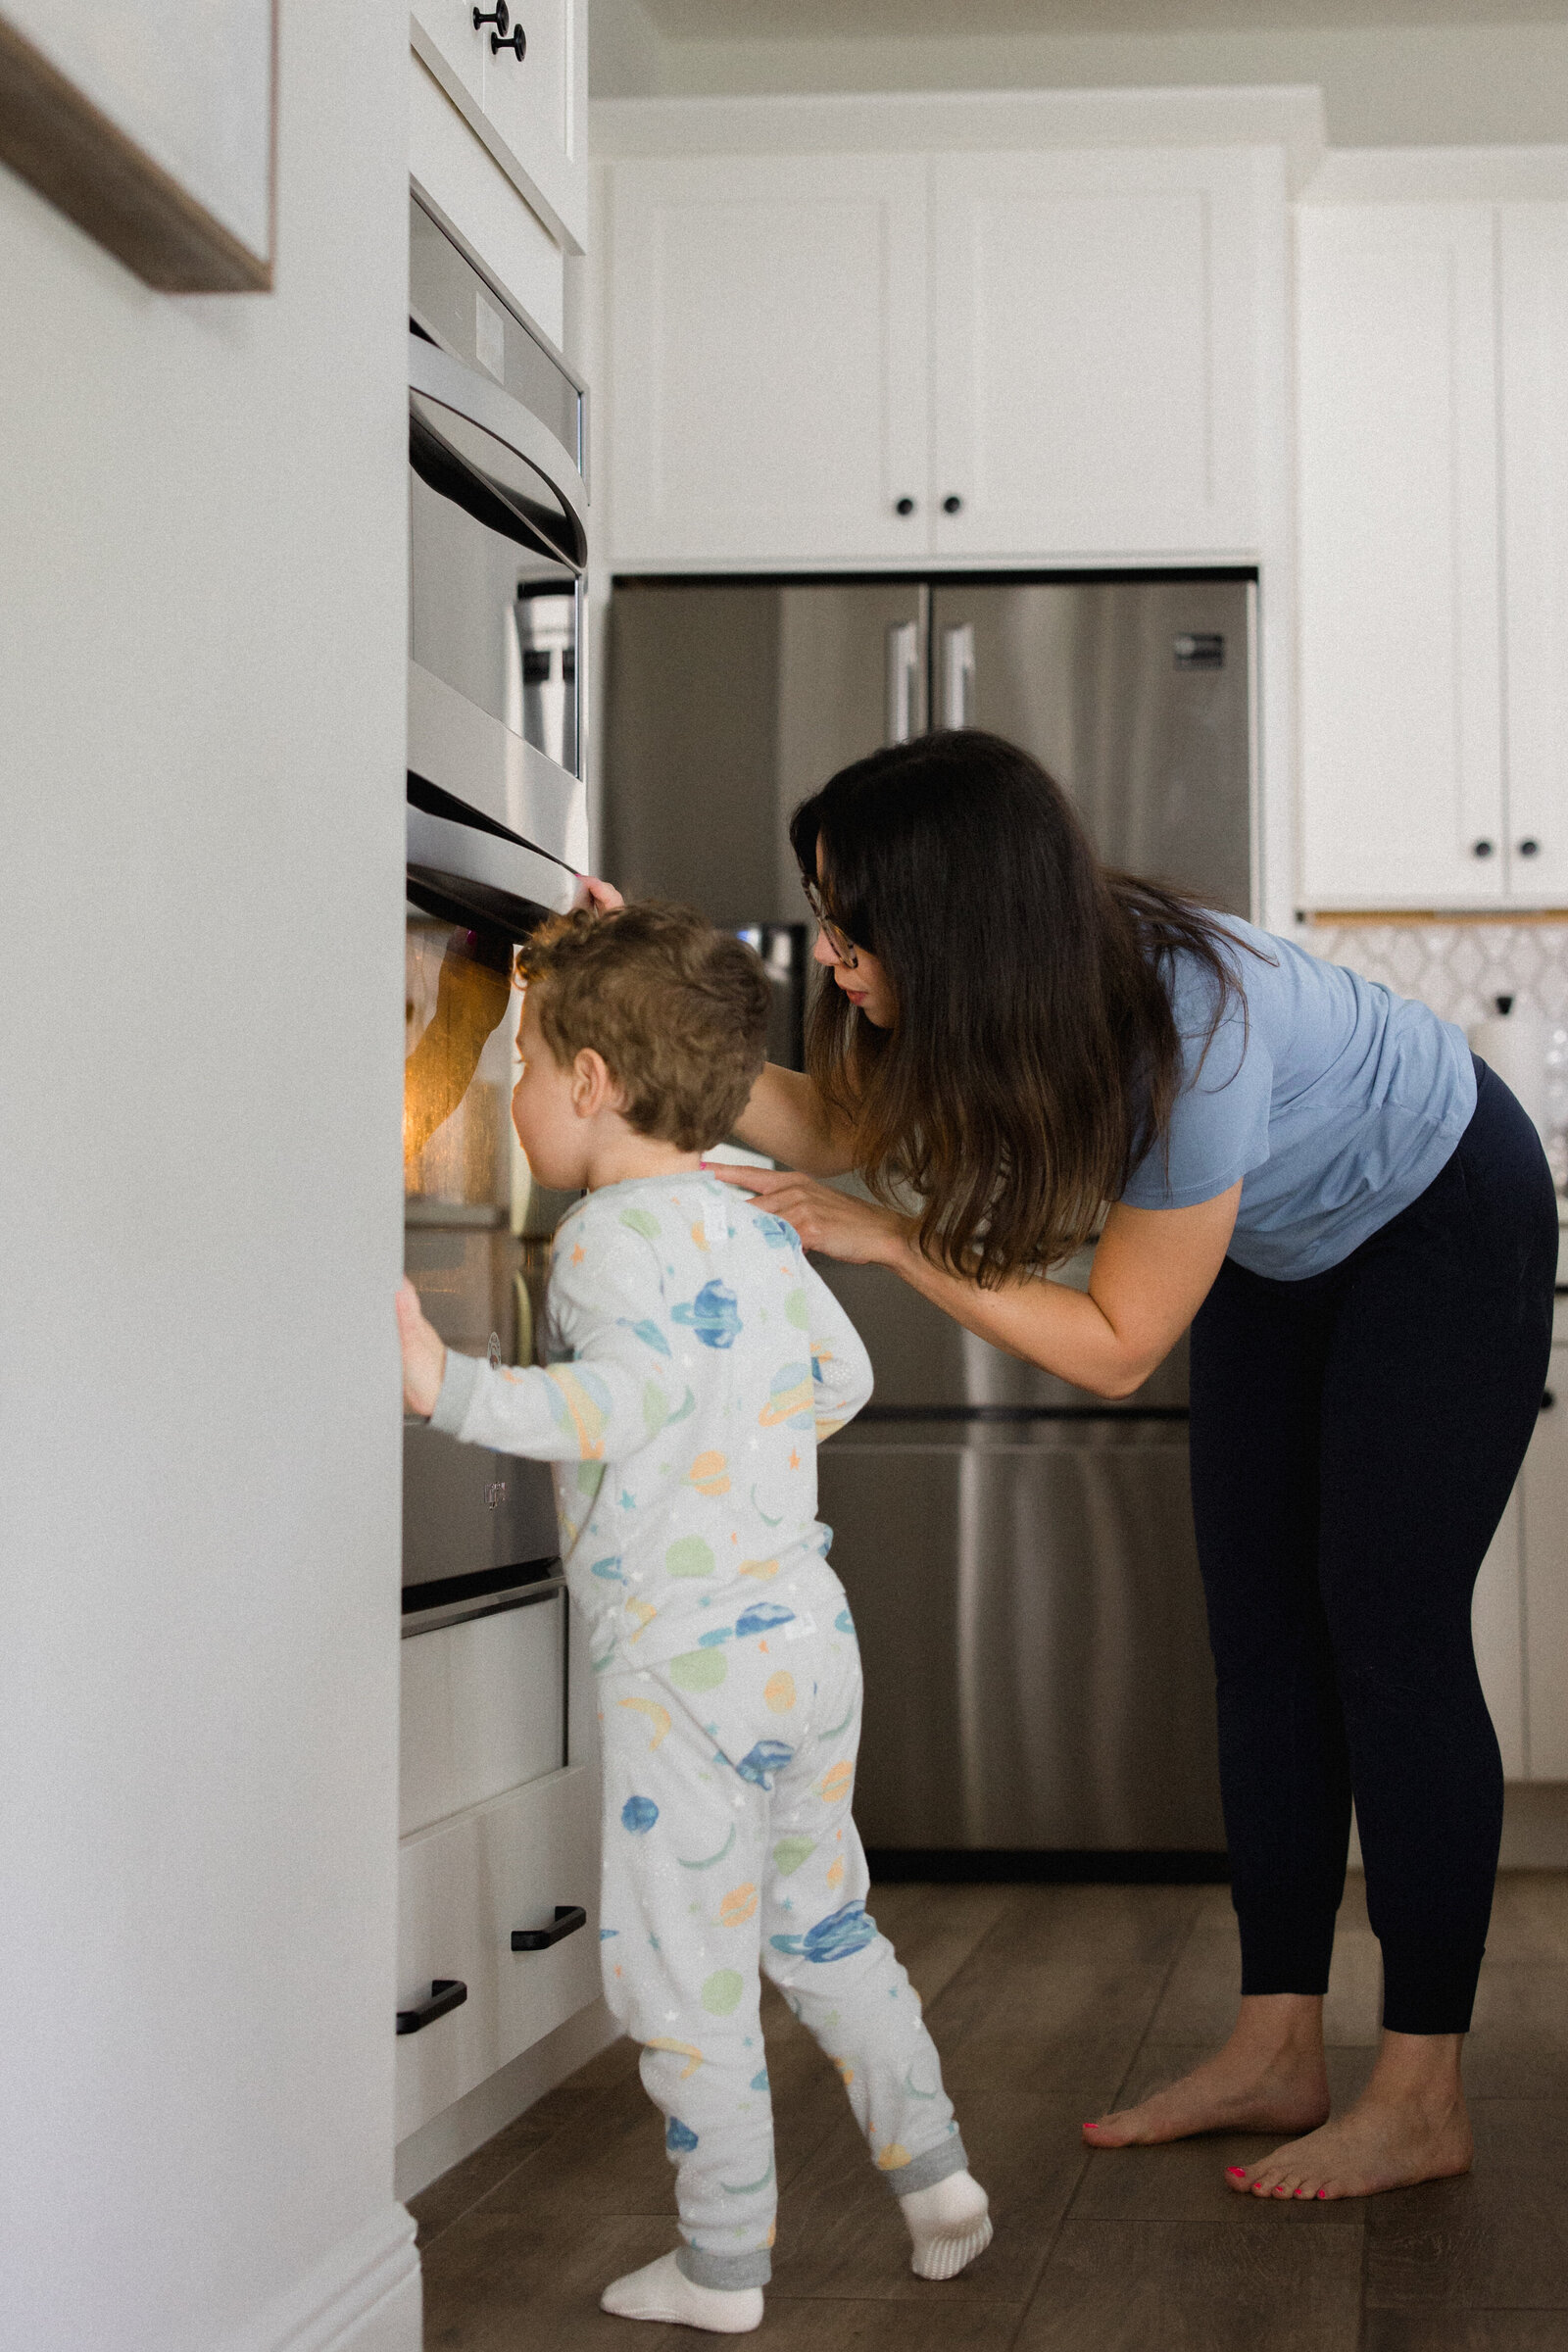 Mom and son look into oven to watch muffins baking beneath a glowing light